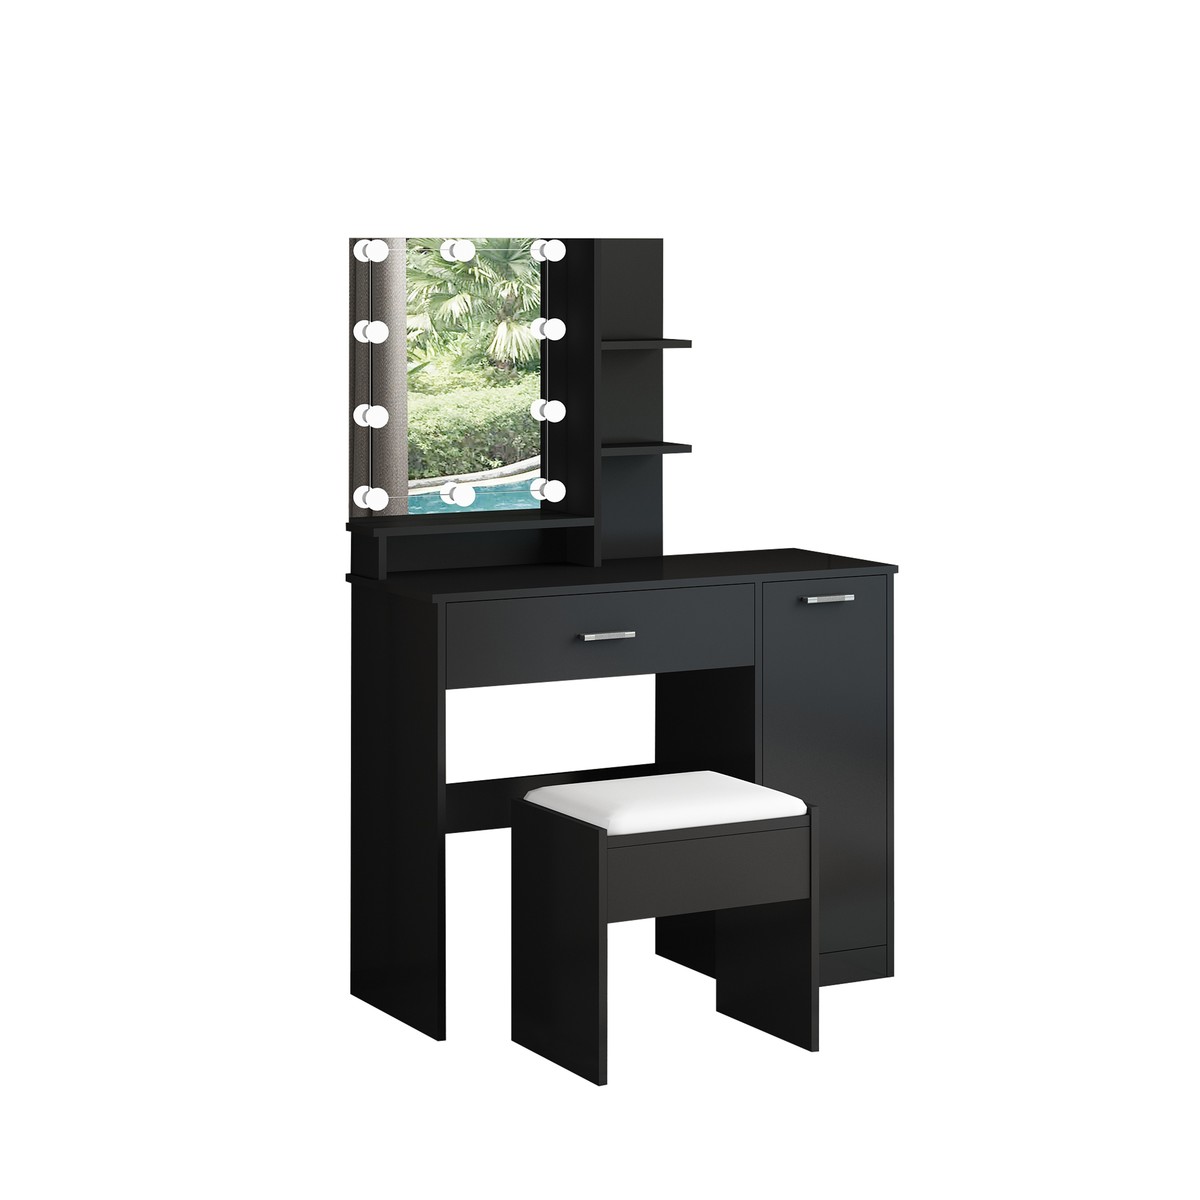 Black Makeup Vanity Table with Stool, Mirror & LED Lights